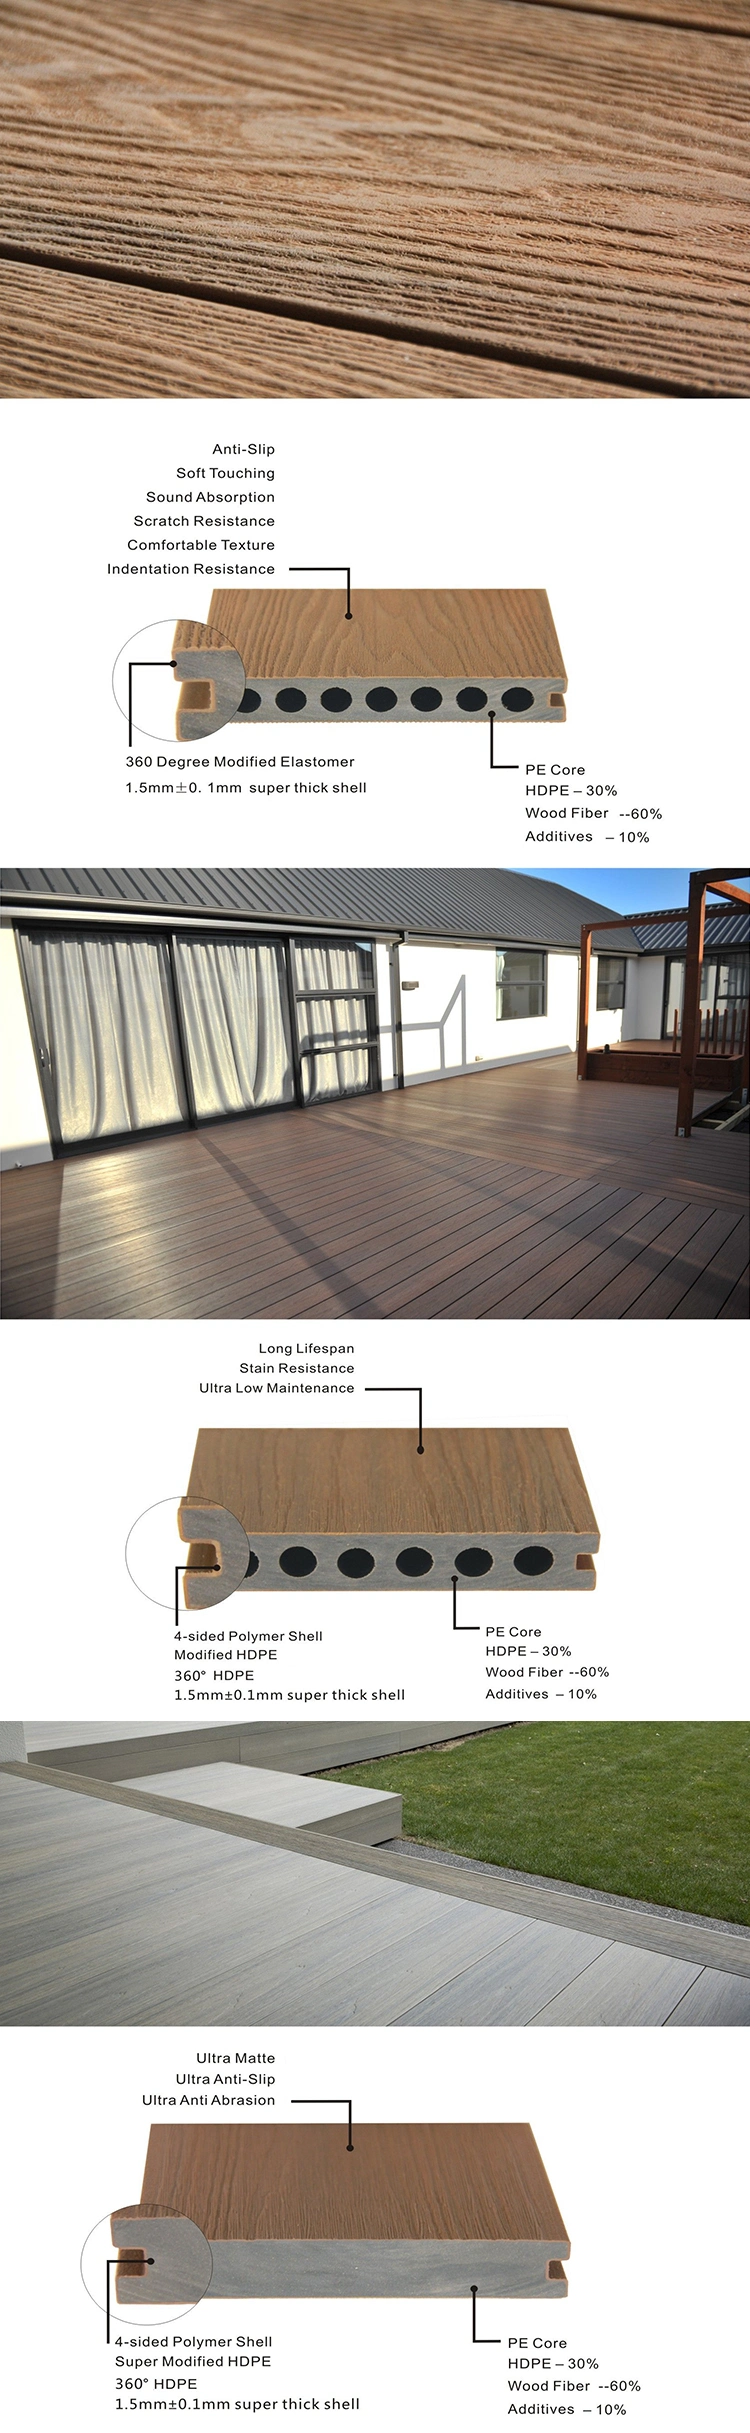 Best Selling UV Resistant Safety WPC Solid Wood Flooring for Garden